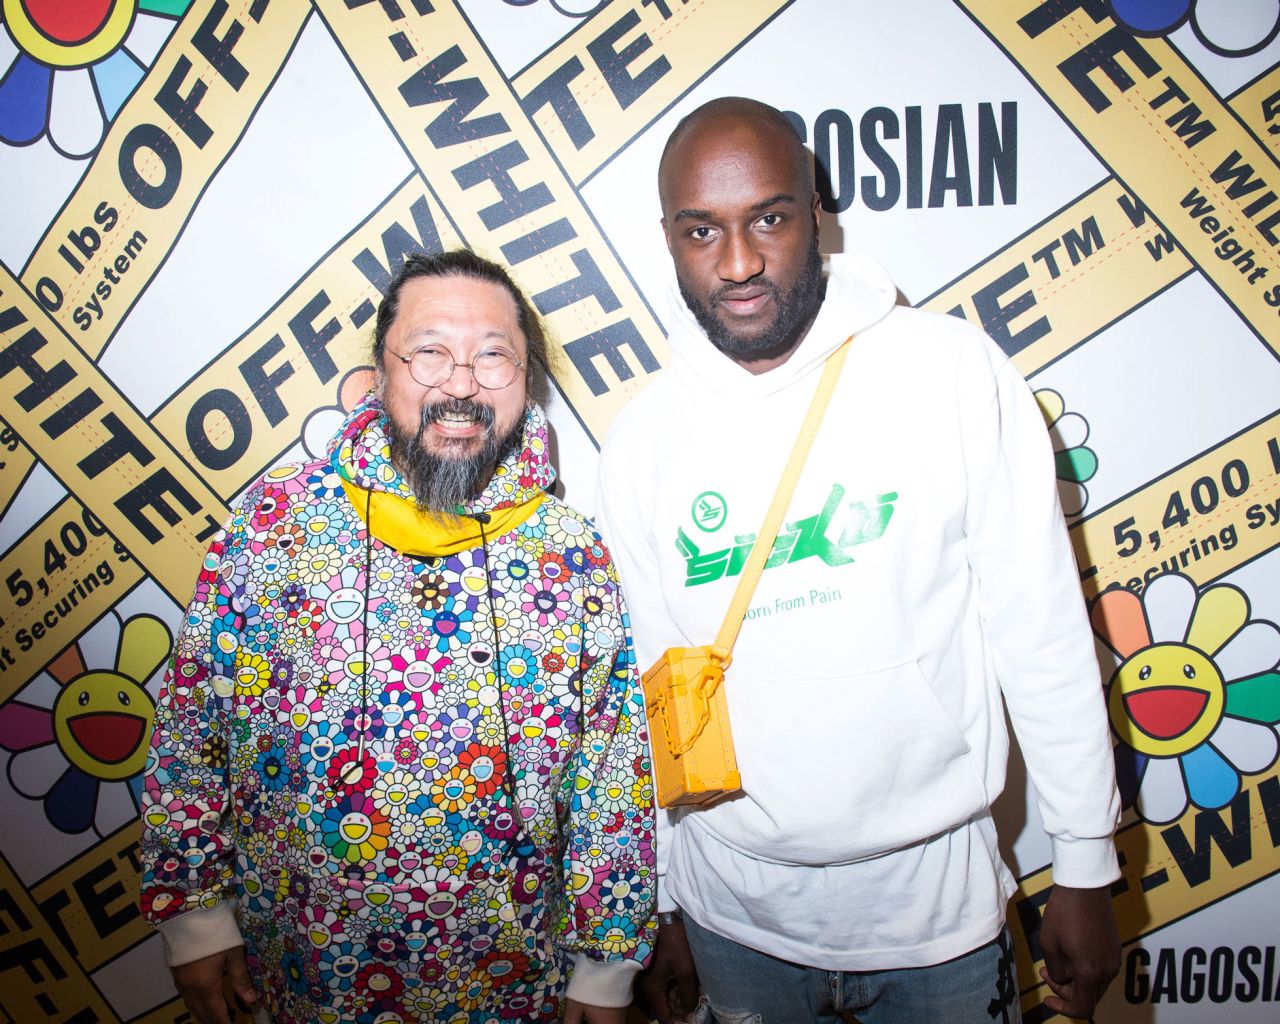 Virgil Abloh dabbled in the art world from time to time and joined forces with Japanese artist Takashi Murakami for a special 2018 "Technicolor 2" exhibition at the Gagosian, releasing artworks which combined Off-White's logo, signature quote details and more with Murakami's multicolor works. The pair also collaborated on other Gagosian exhibits, including "future history" and "American TOO."